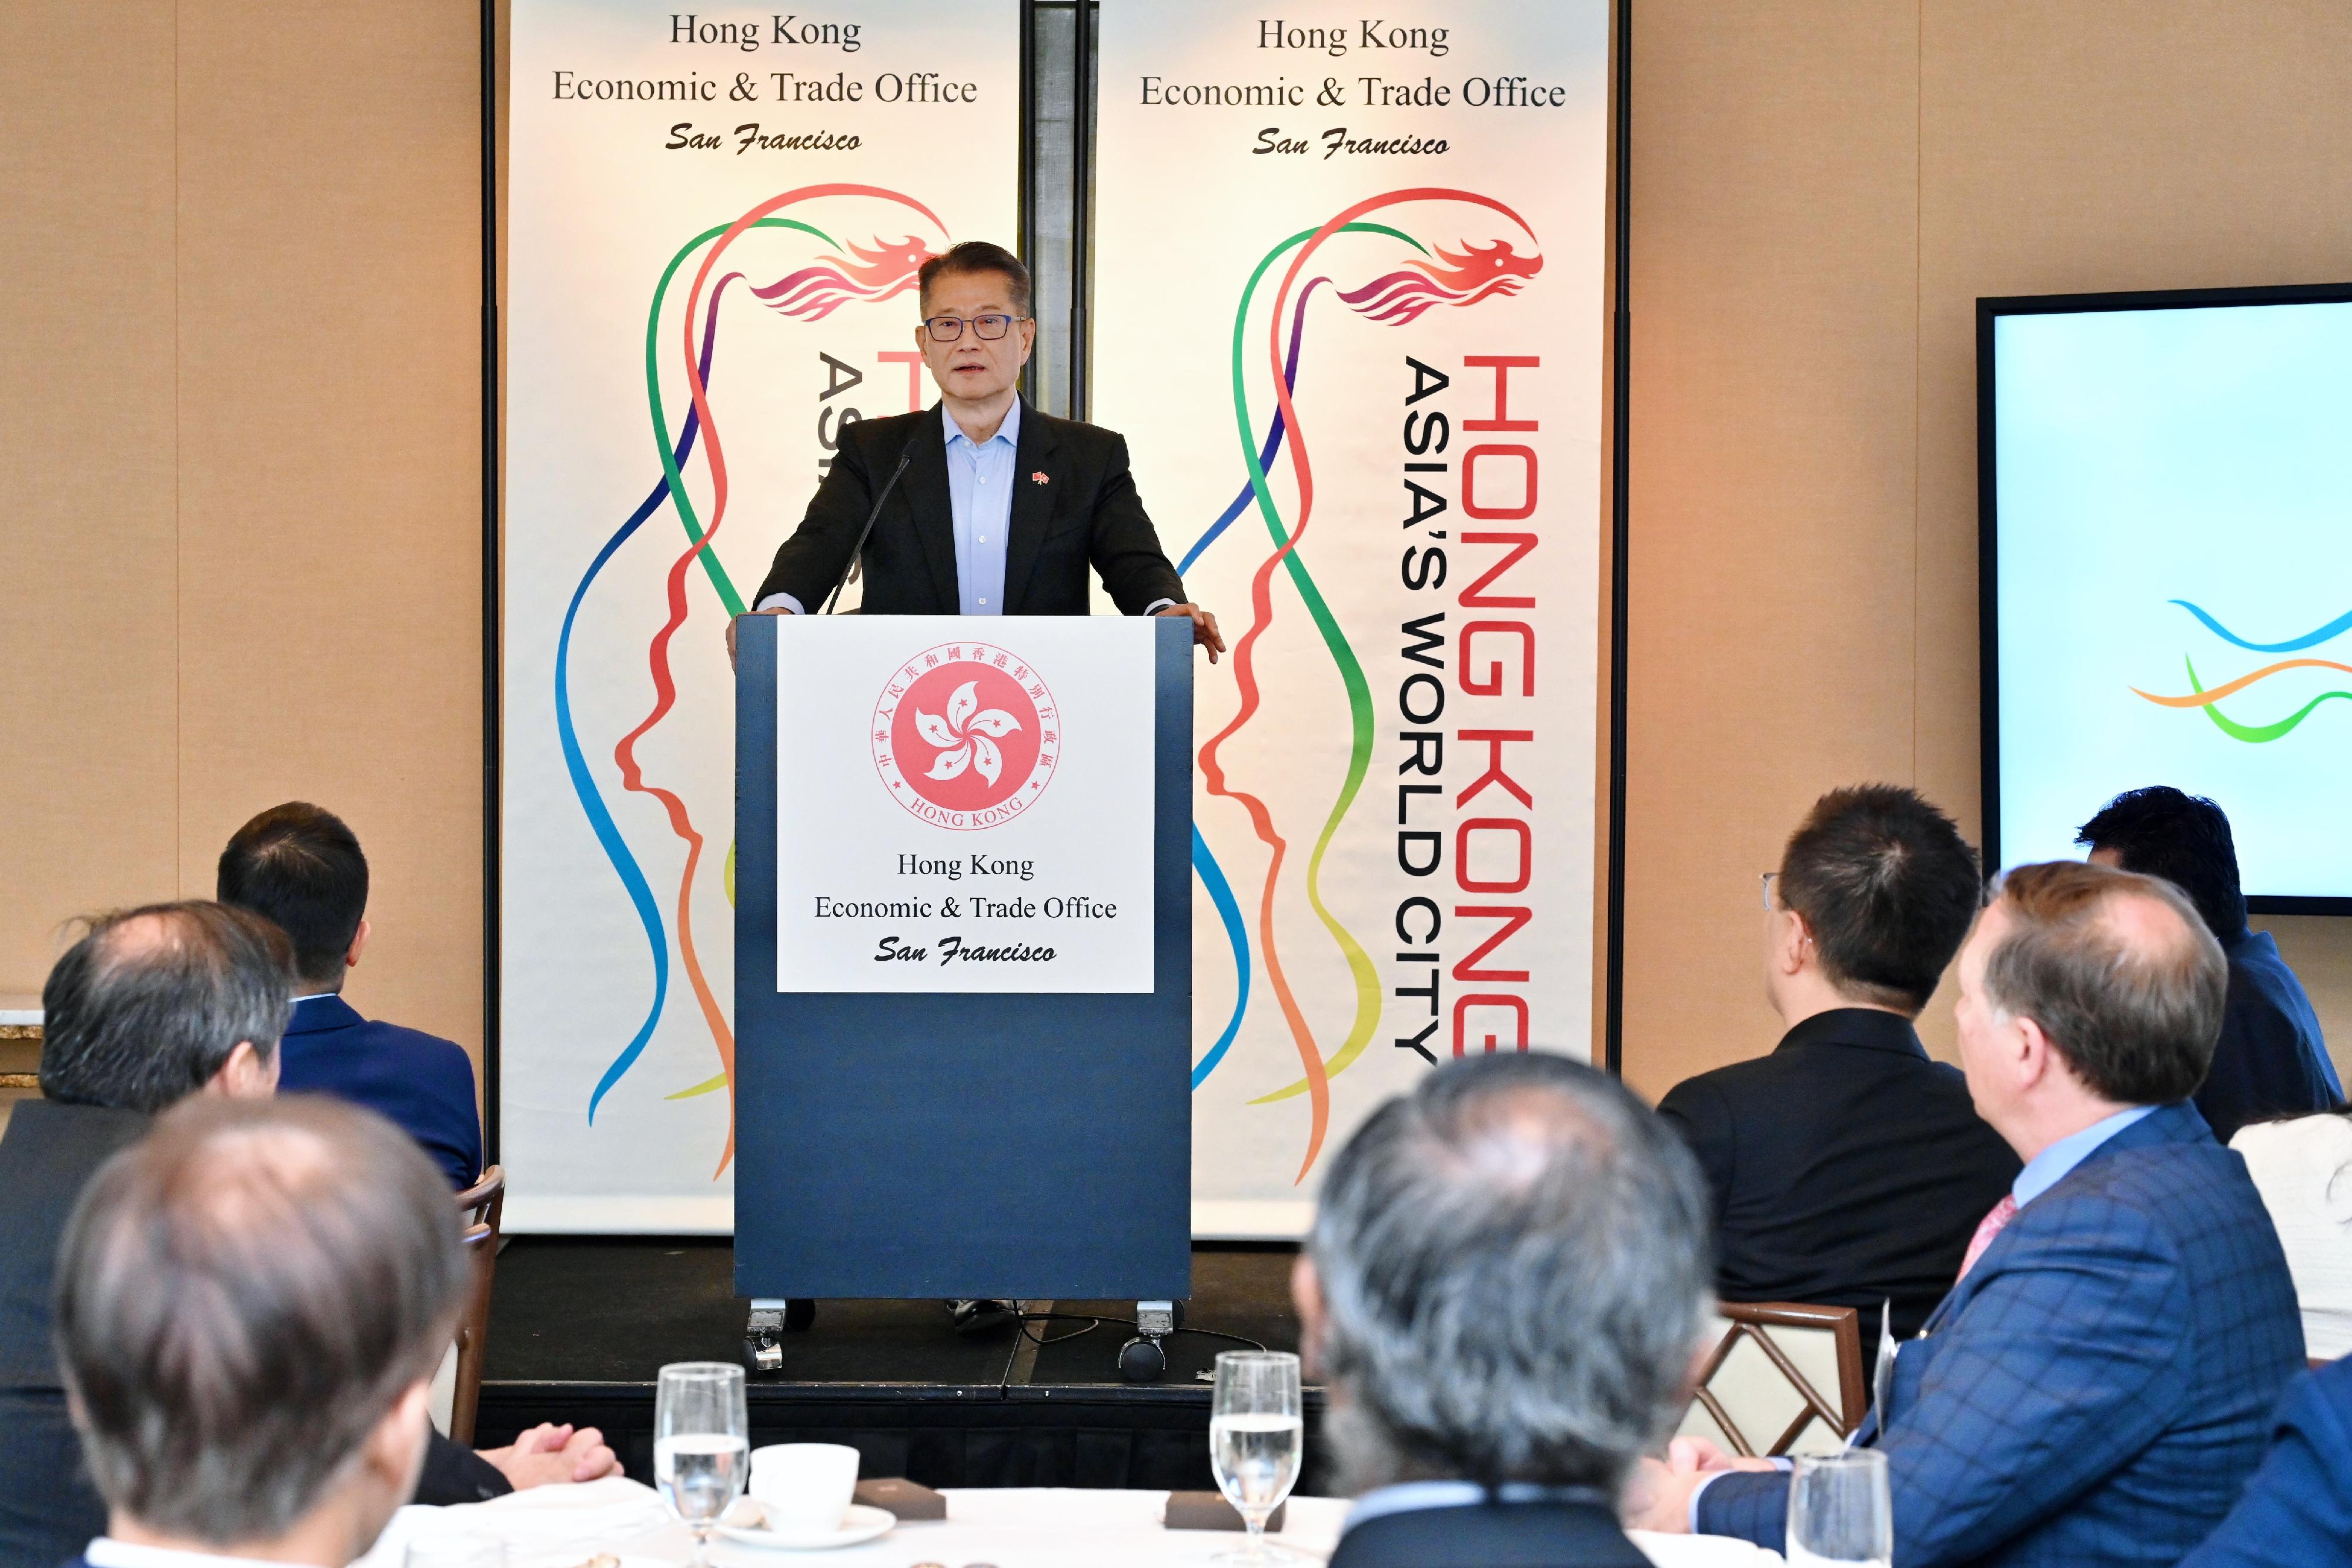 The Financial Secretary, Mr Paul Chan, attended a business luncheon held by the Hong Kong Economic and Trade Office in San Francisco yesterday (November 15, San Francisco time), where he introduced Hong Kong's advantages to representatives of startups, venture capital and private equity firms. Photo shows Mr Chan delivering a speech during the luncheon.